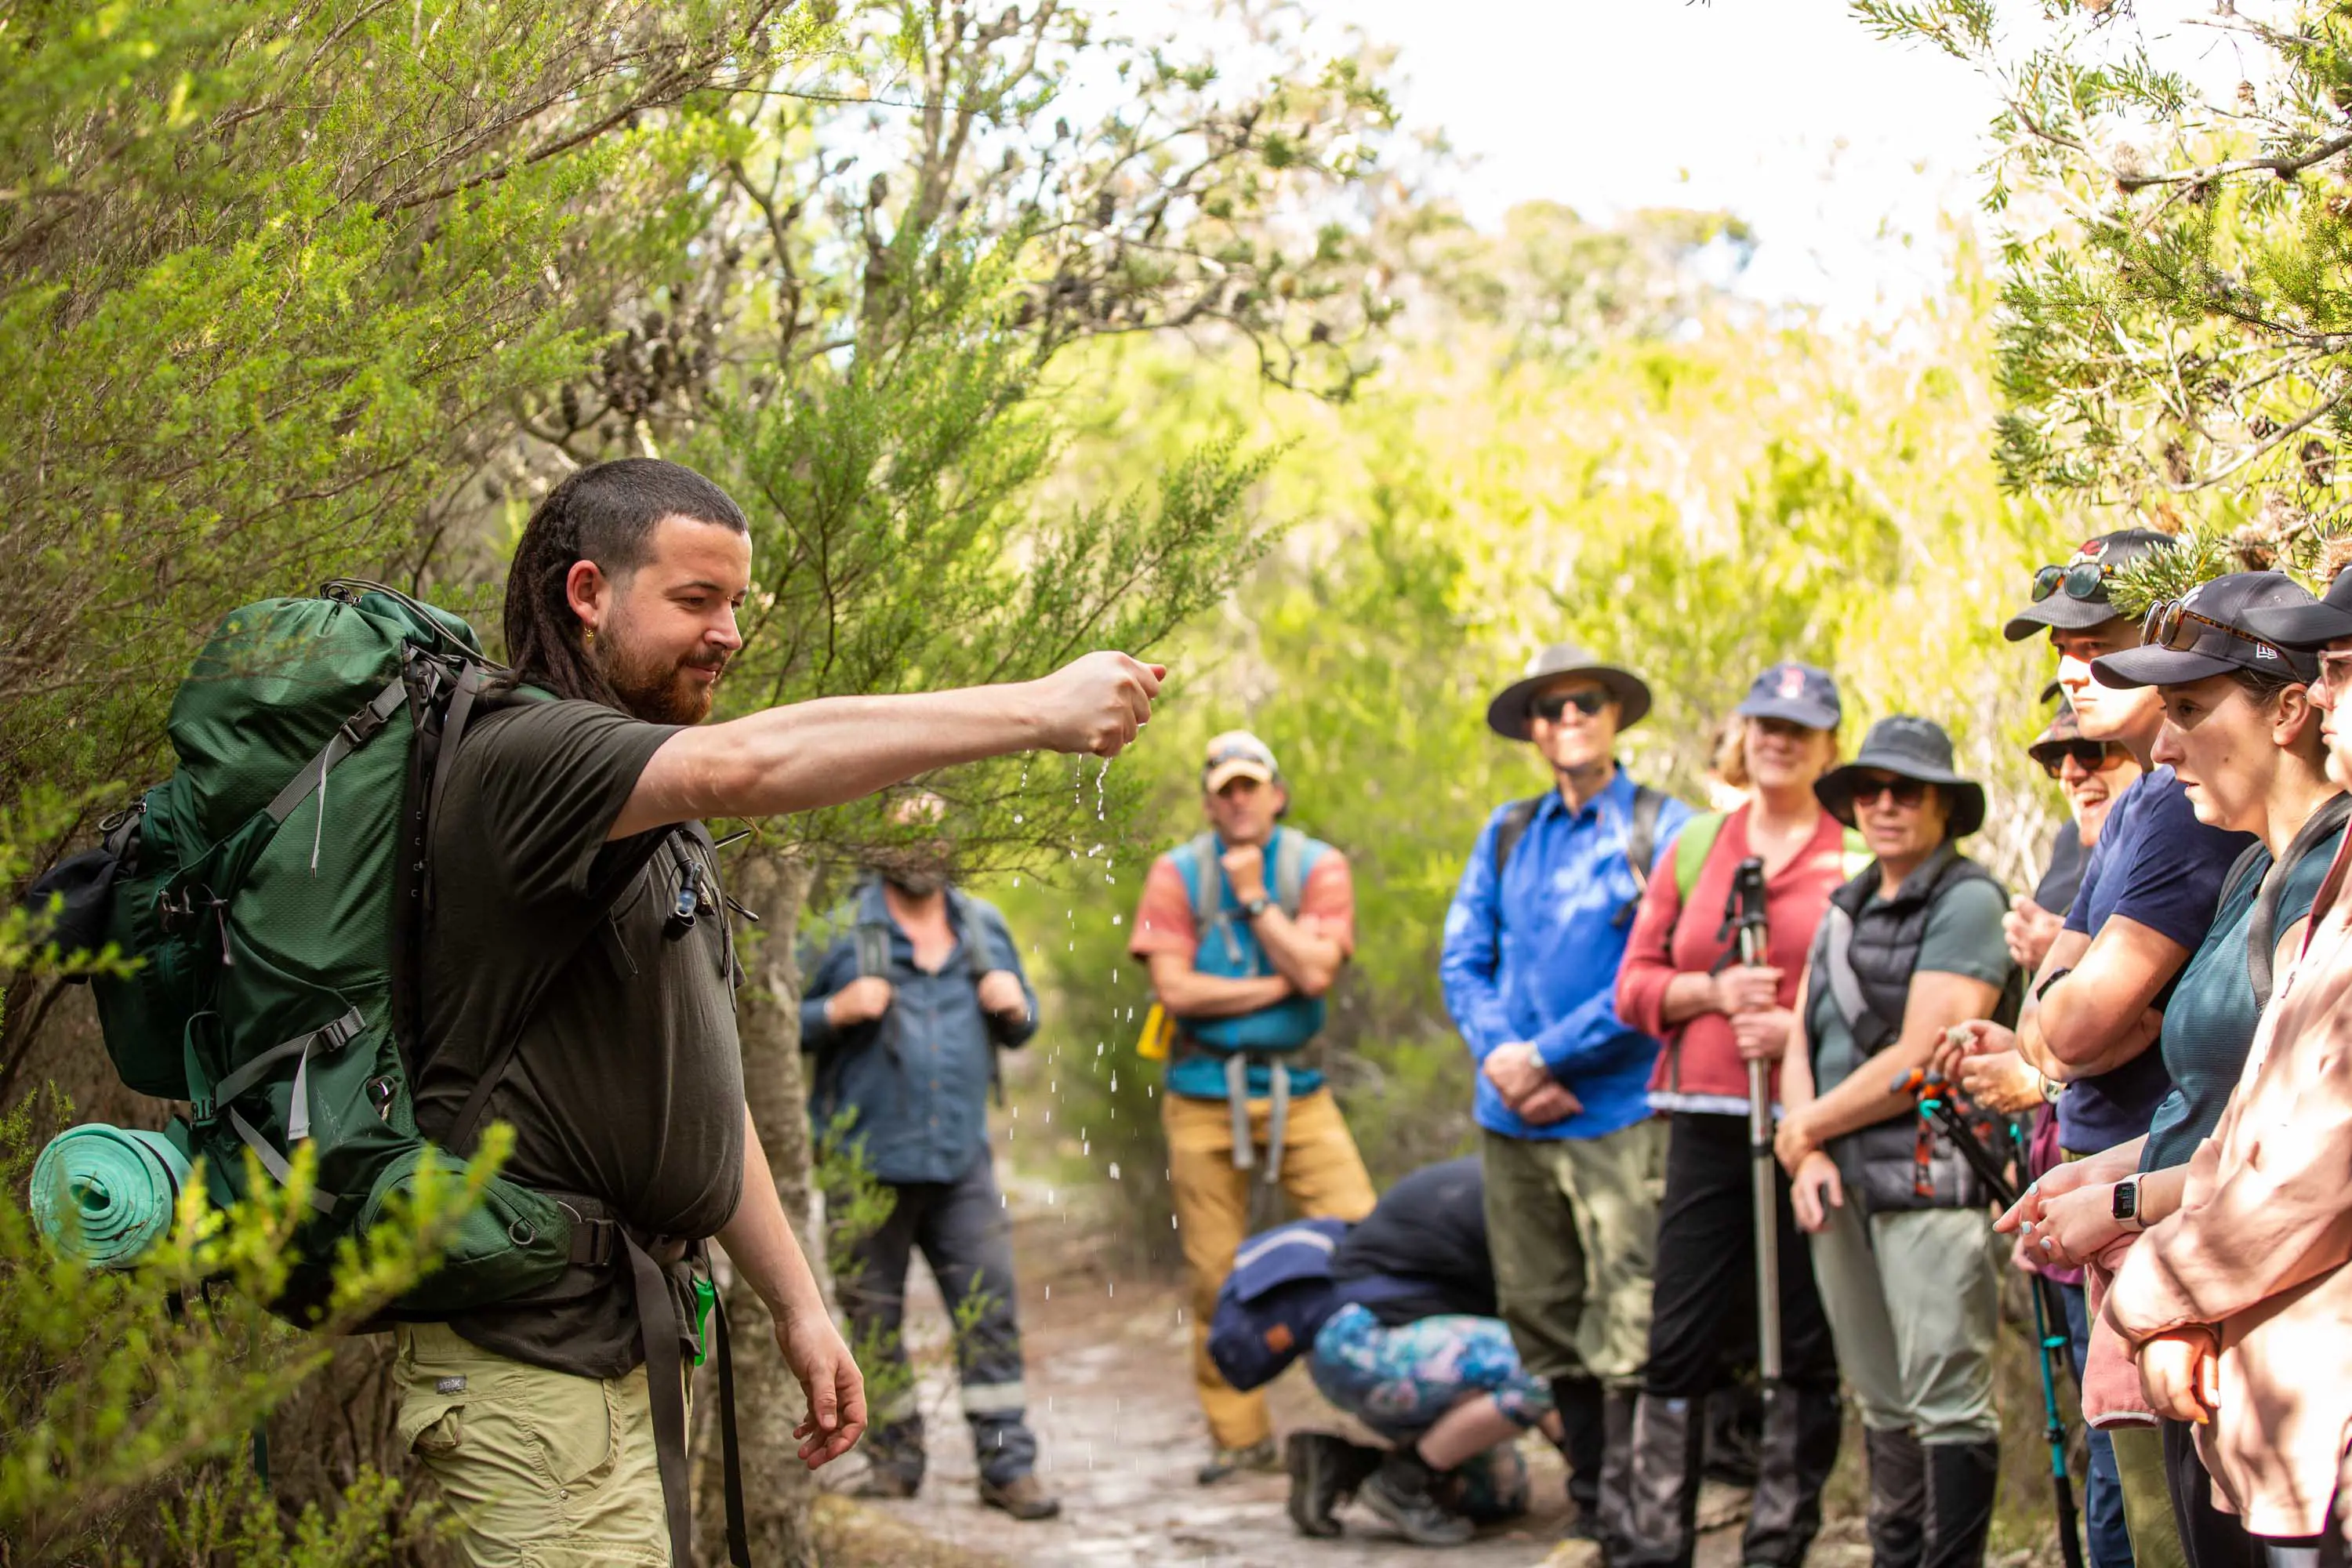 A man holds a demonstration in front of a group of hikers in dense bushland.